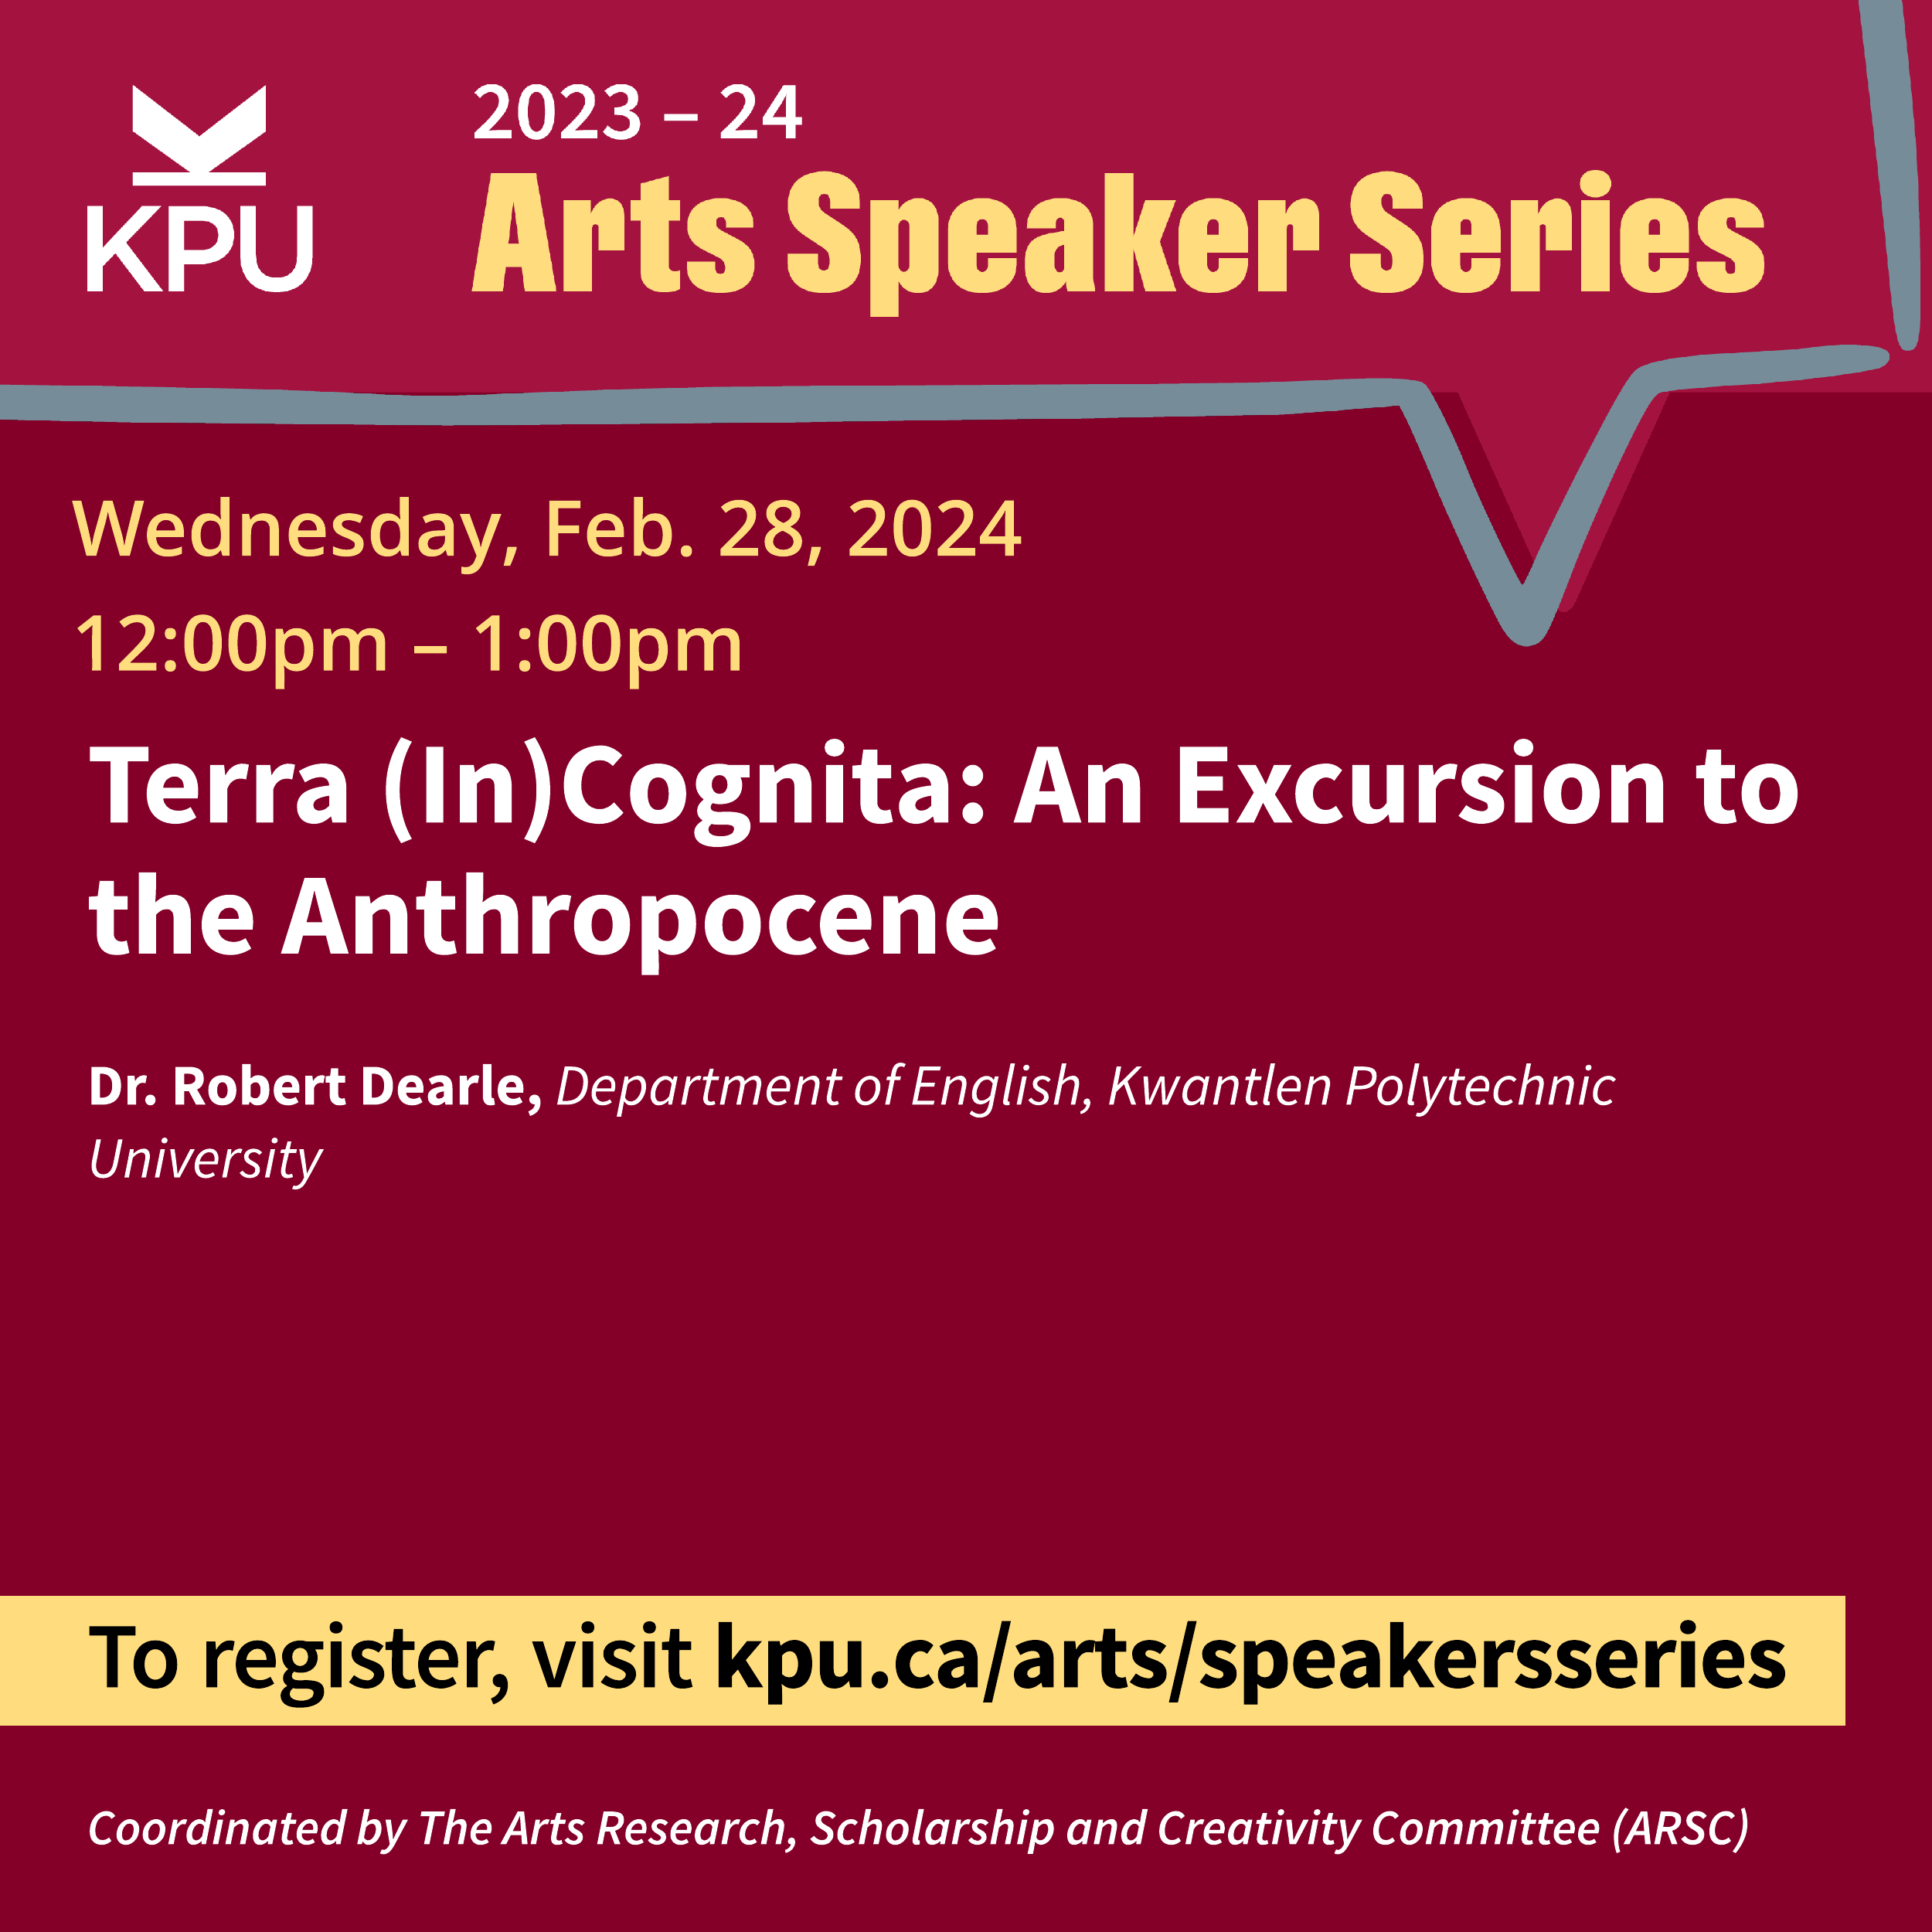 Arts Speaker Series: Feb. 28th Session. 12:00pm – 1:00pm. Terra (In)Cognita: An Excursion to the Anthropocene. Robert Dearle, Department of English, Kwantlen Polytechnic University.